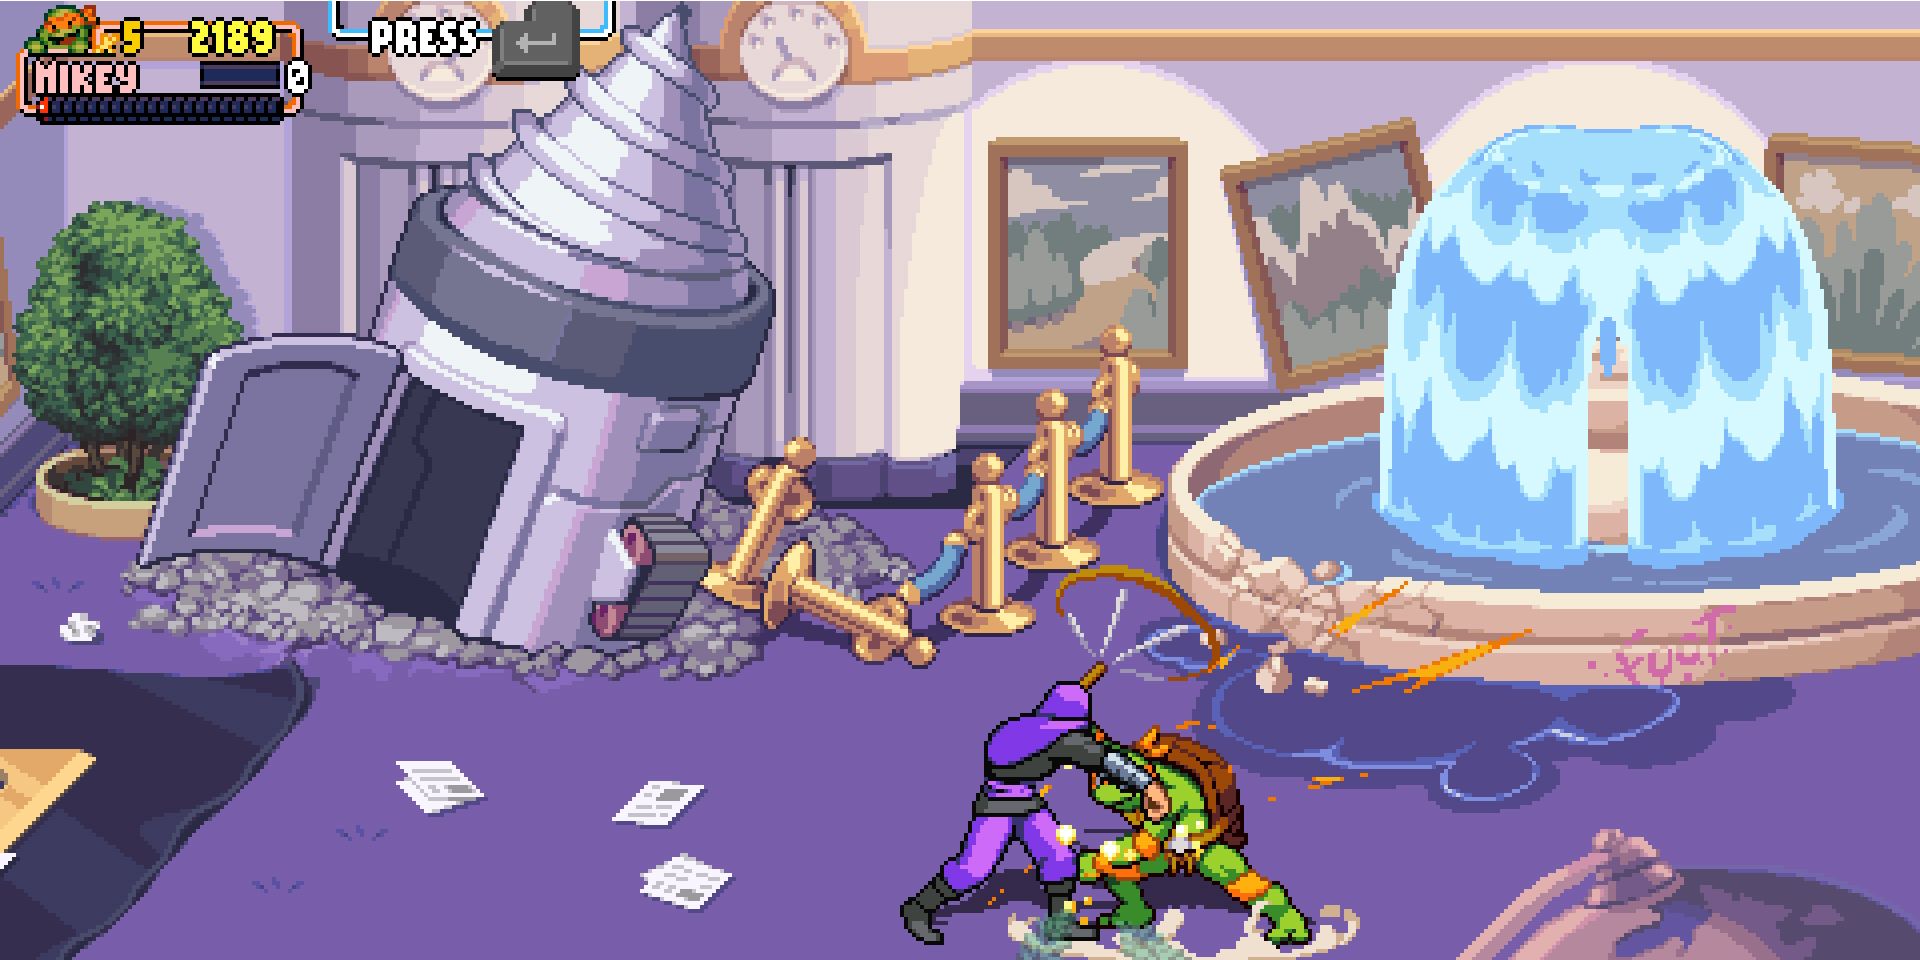 A screenshot showing Michaelangelo not getting knocked back by an enemy strike during a charged attack in Teenage Mutant Ninja Turtles: Shredder's Revenge